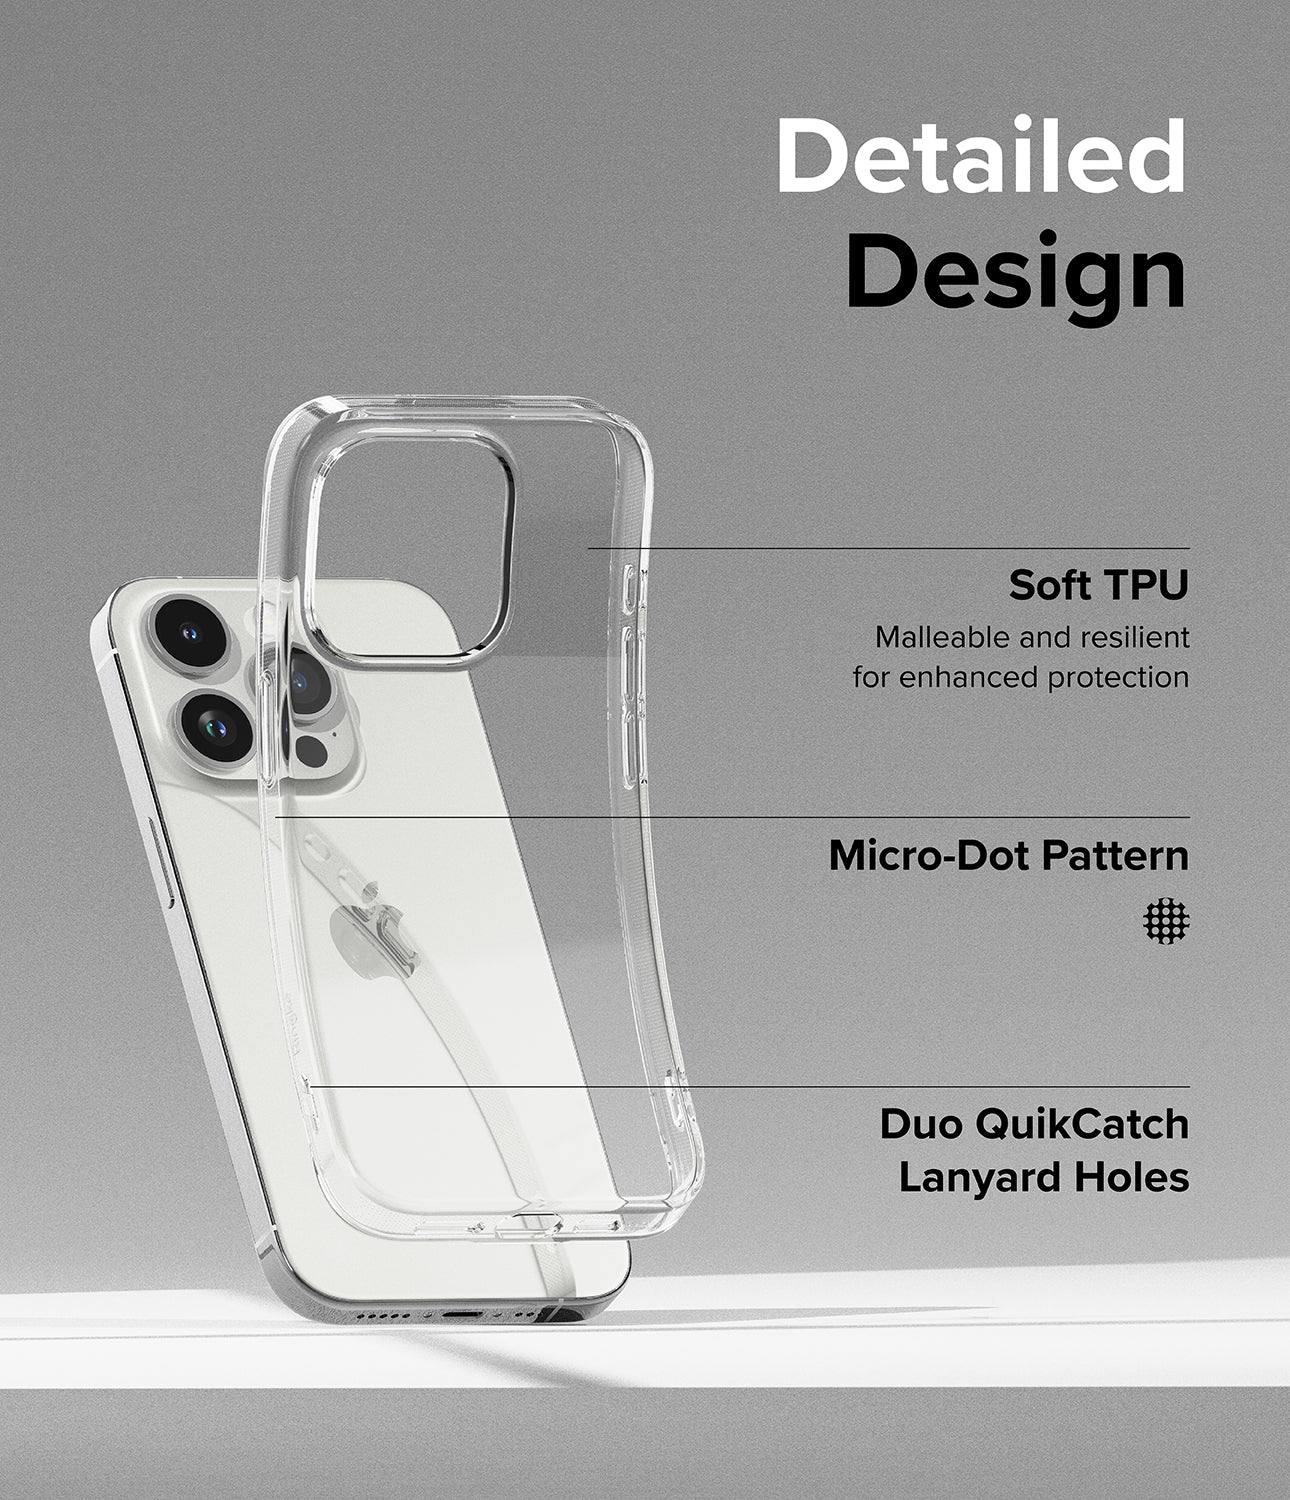 iPhone 15 Pro Case | Air - Detailed Design. Soft-TPU. Malleable and resilient for enhanced protection. Micro-Dot Pattern. Duo QuikCatch Lanyard Holes.